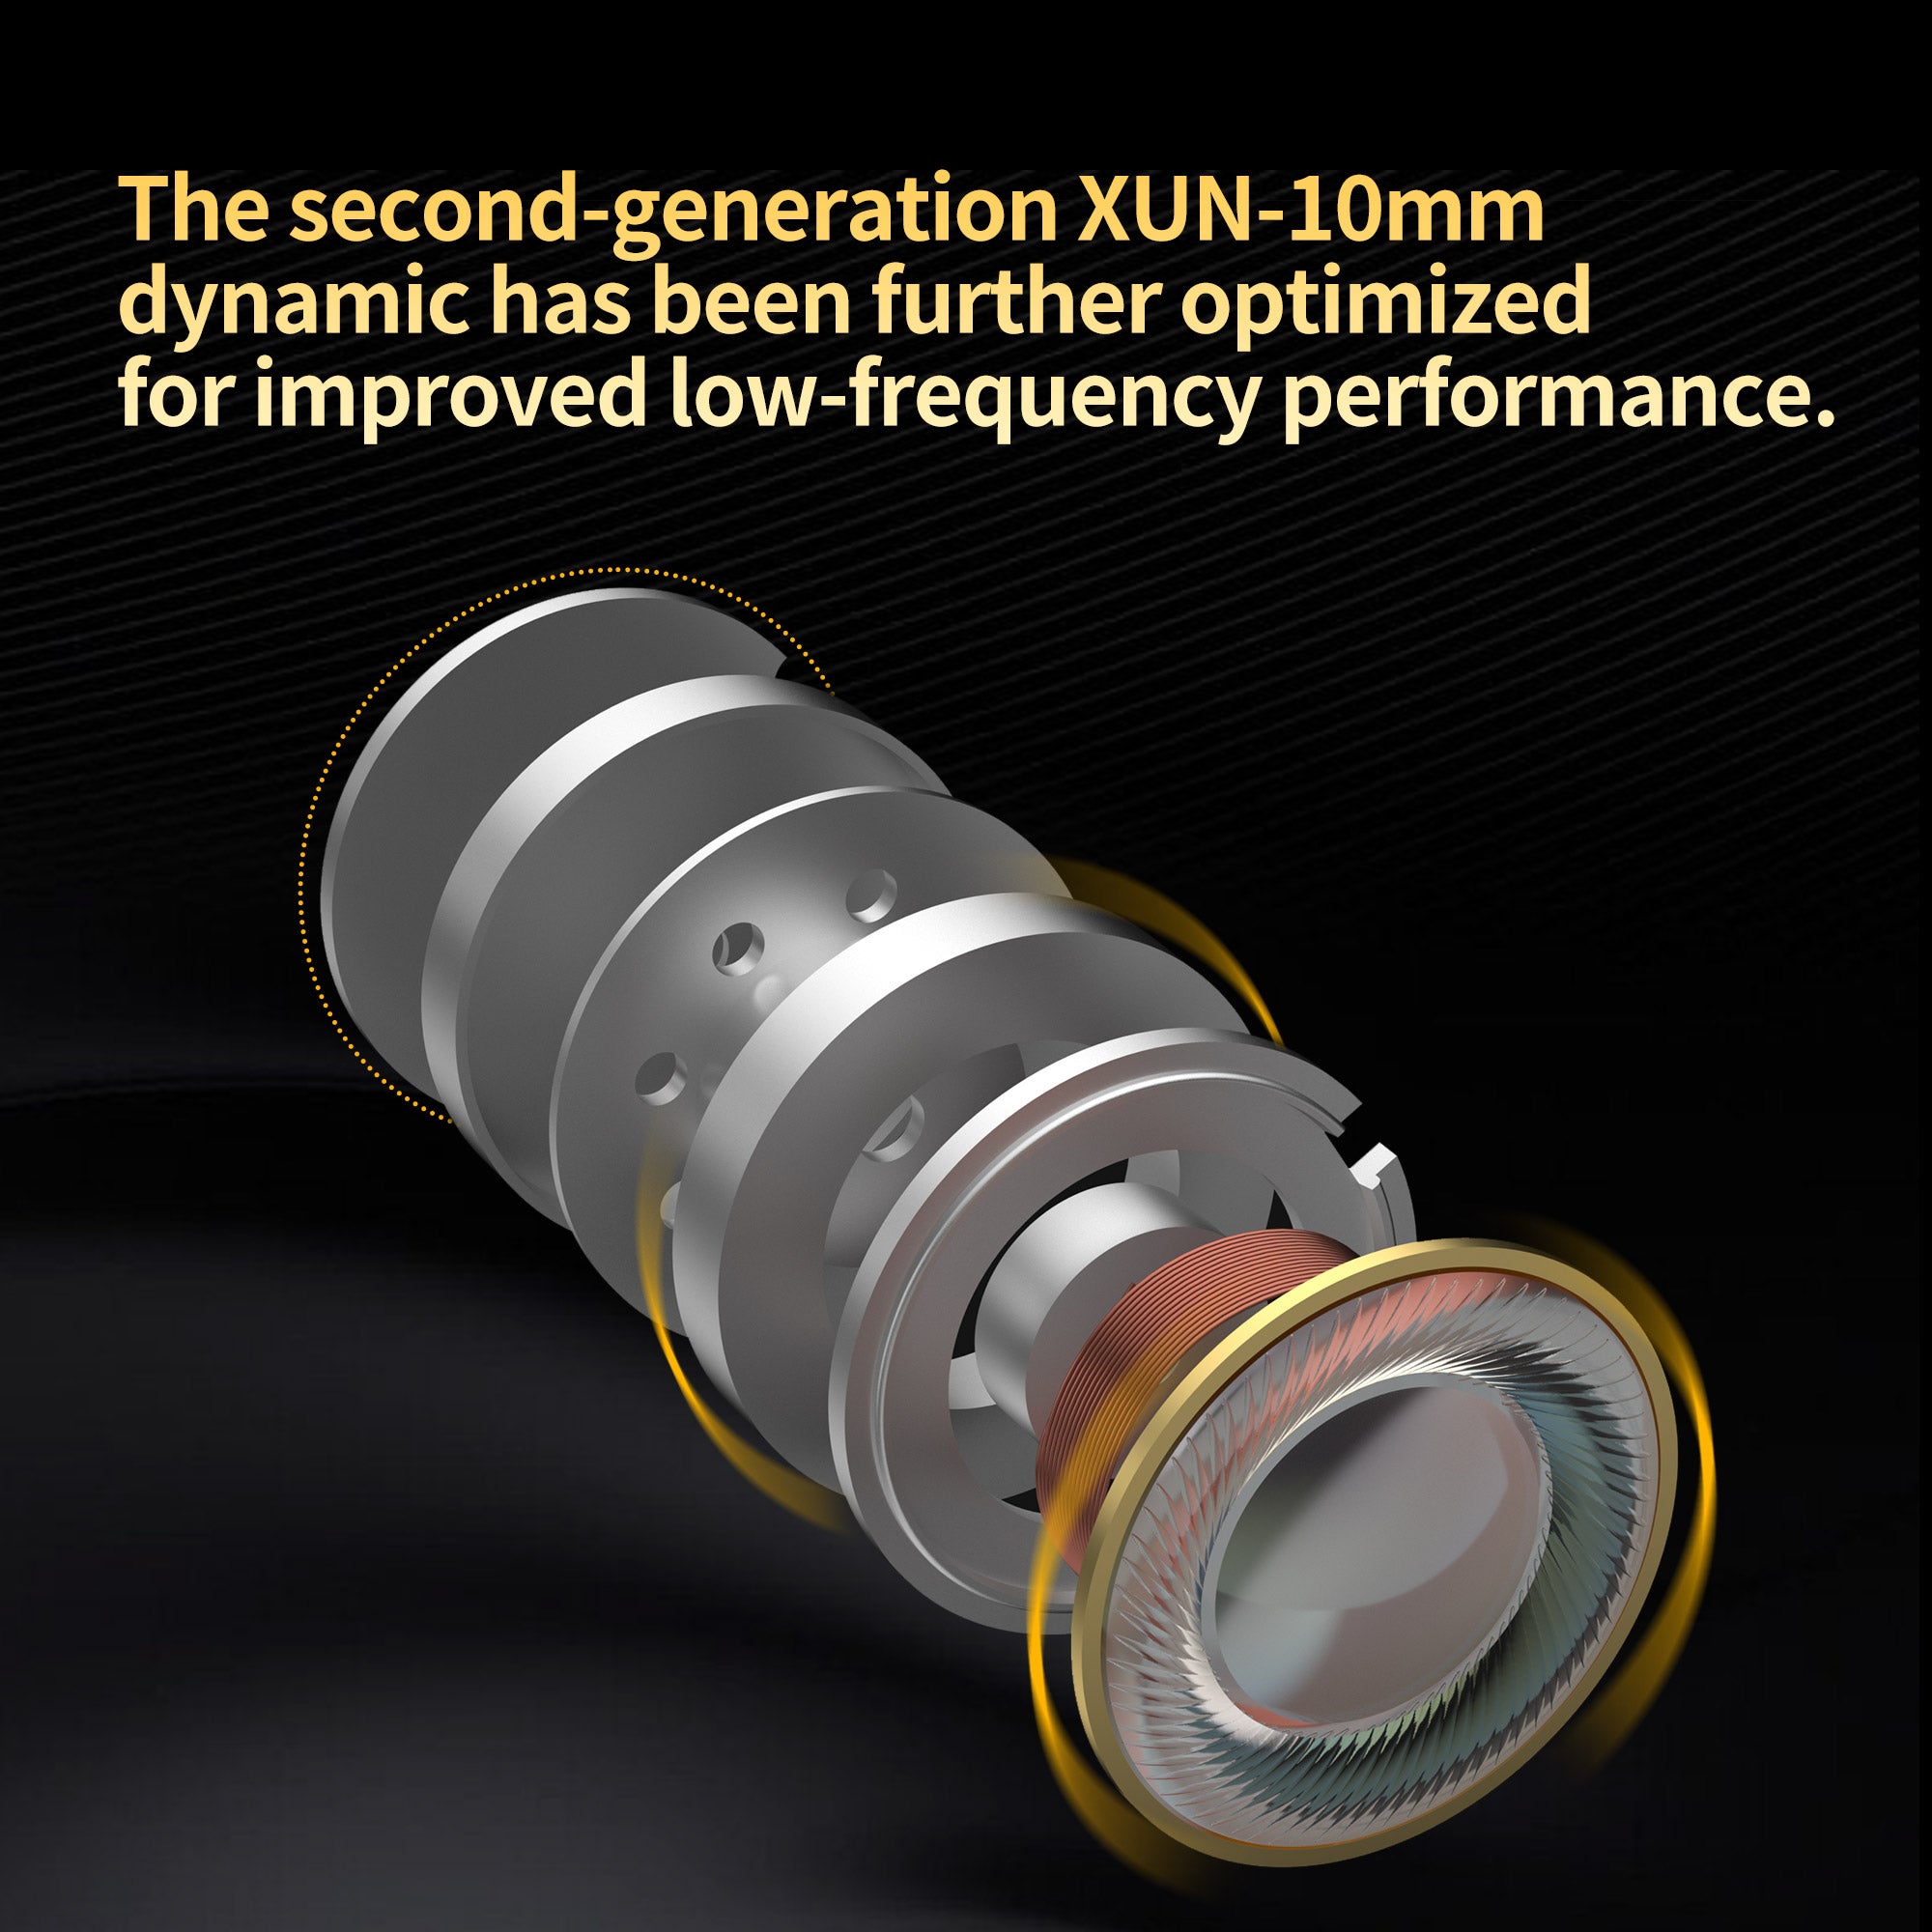 The second-generation XUN-10mm dynamic has been further optimized for improved low-frequency performance.